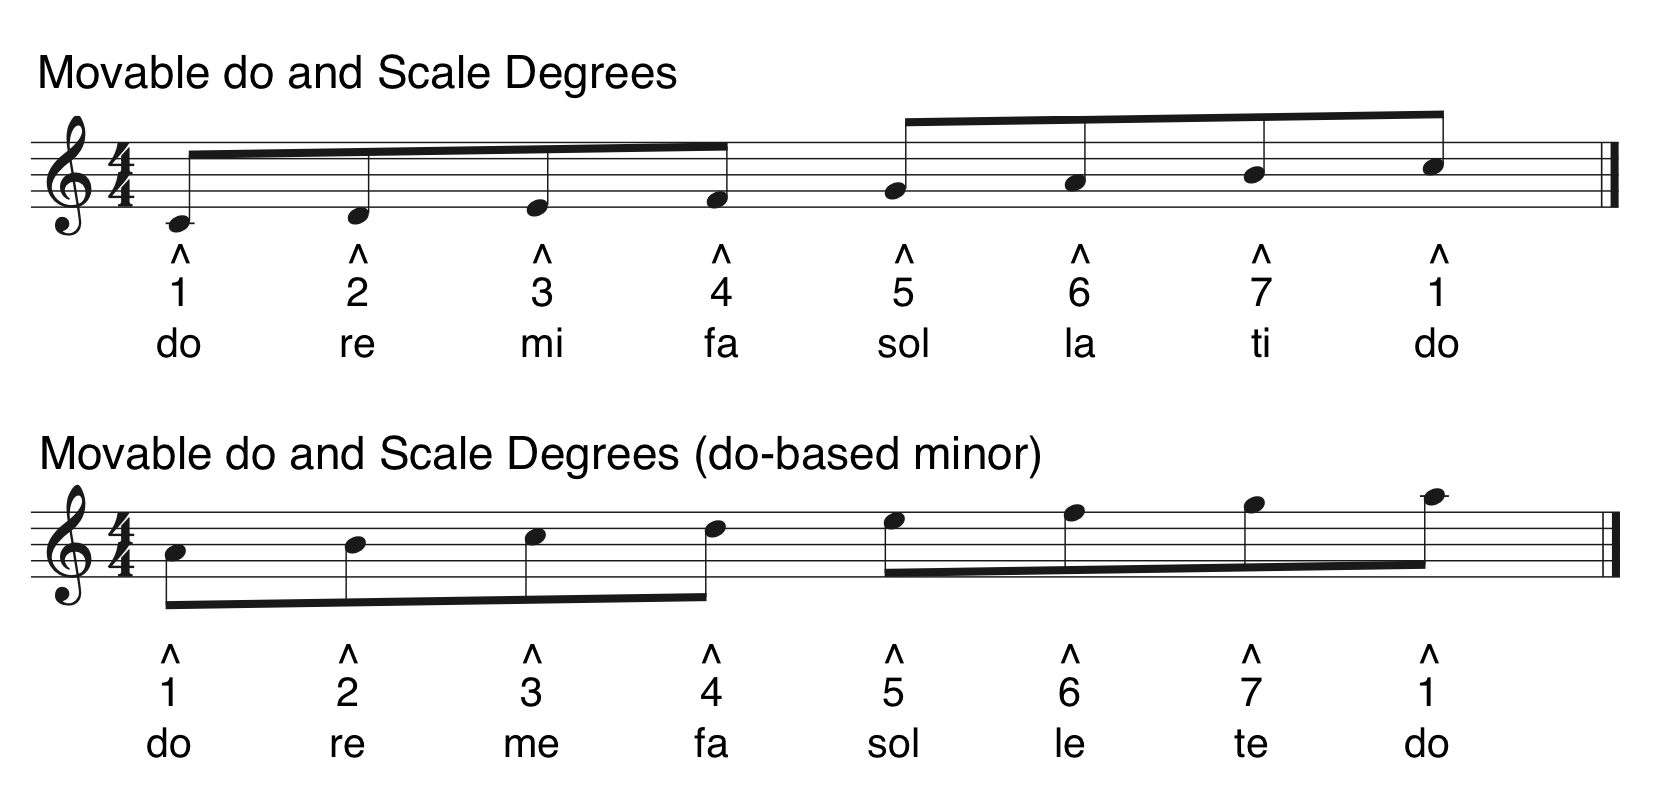 Two notated scales showing moveable do solfège with la-based minor, and scale degree syllables. For the C major scale, the scale degrees are 1, 2, 3, 4, 5, 6, 7, 1 and the solfège syllables are do, re, mi, fa, sol, la, ti, do. For the A minor scale, the scale degrees are 1, 2, 3, 4, 5, 6, 7, 1, and the solfège syllables are do, re, me, fa, sol, le, te, do.